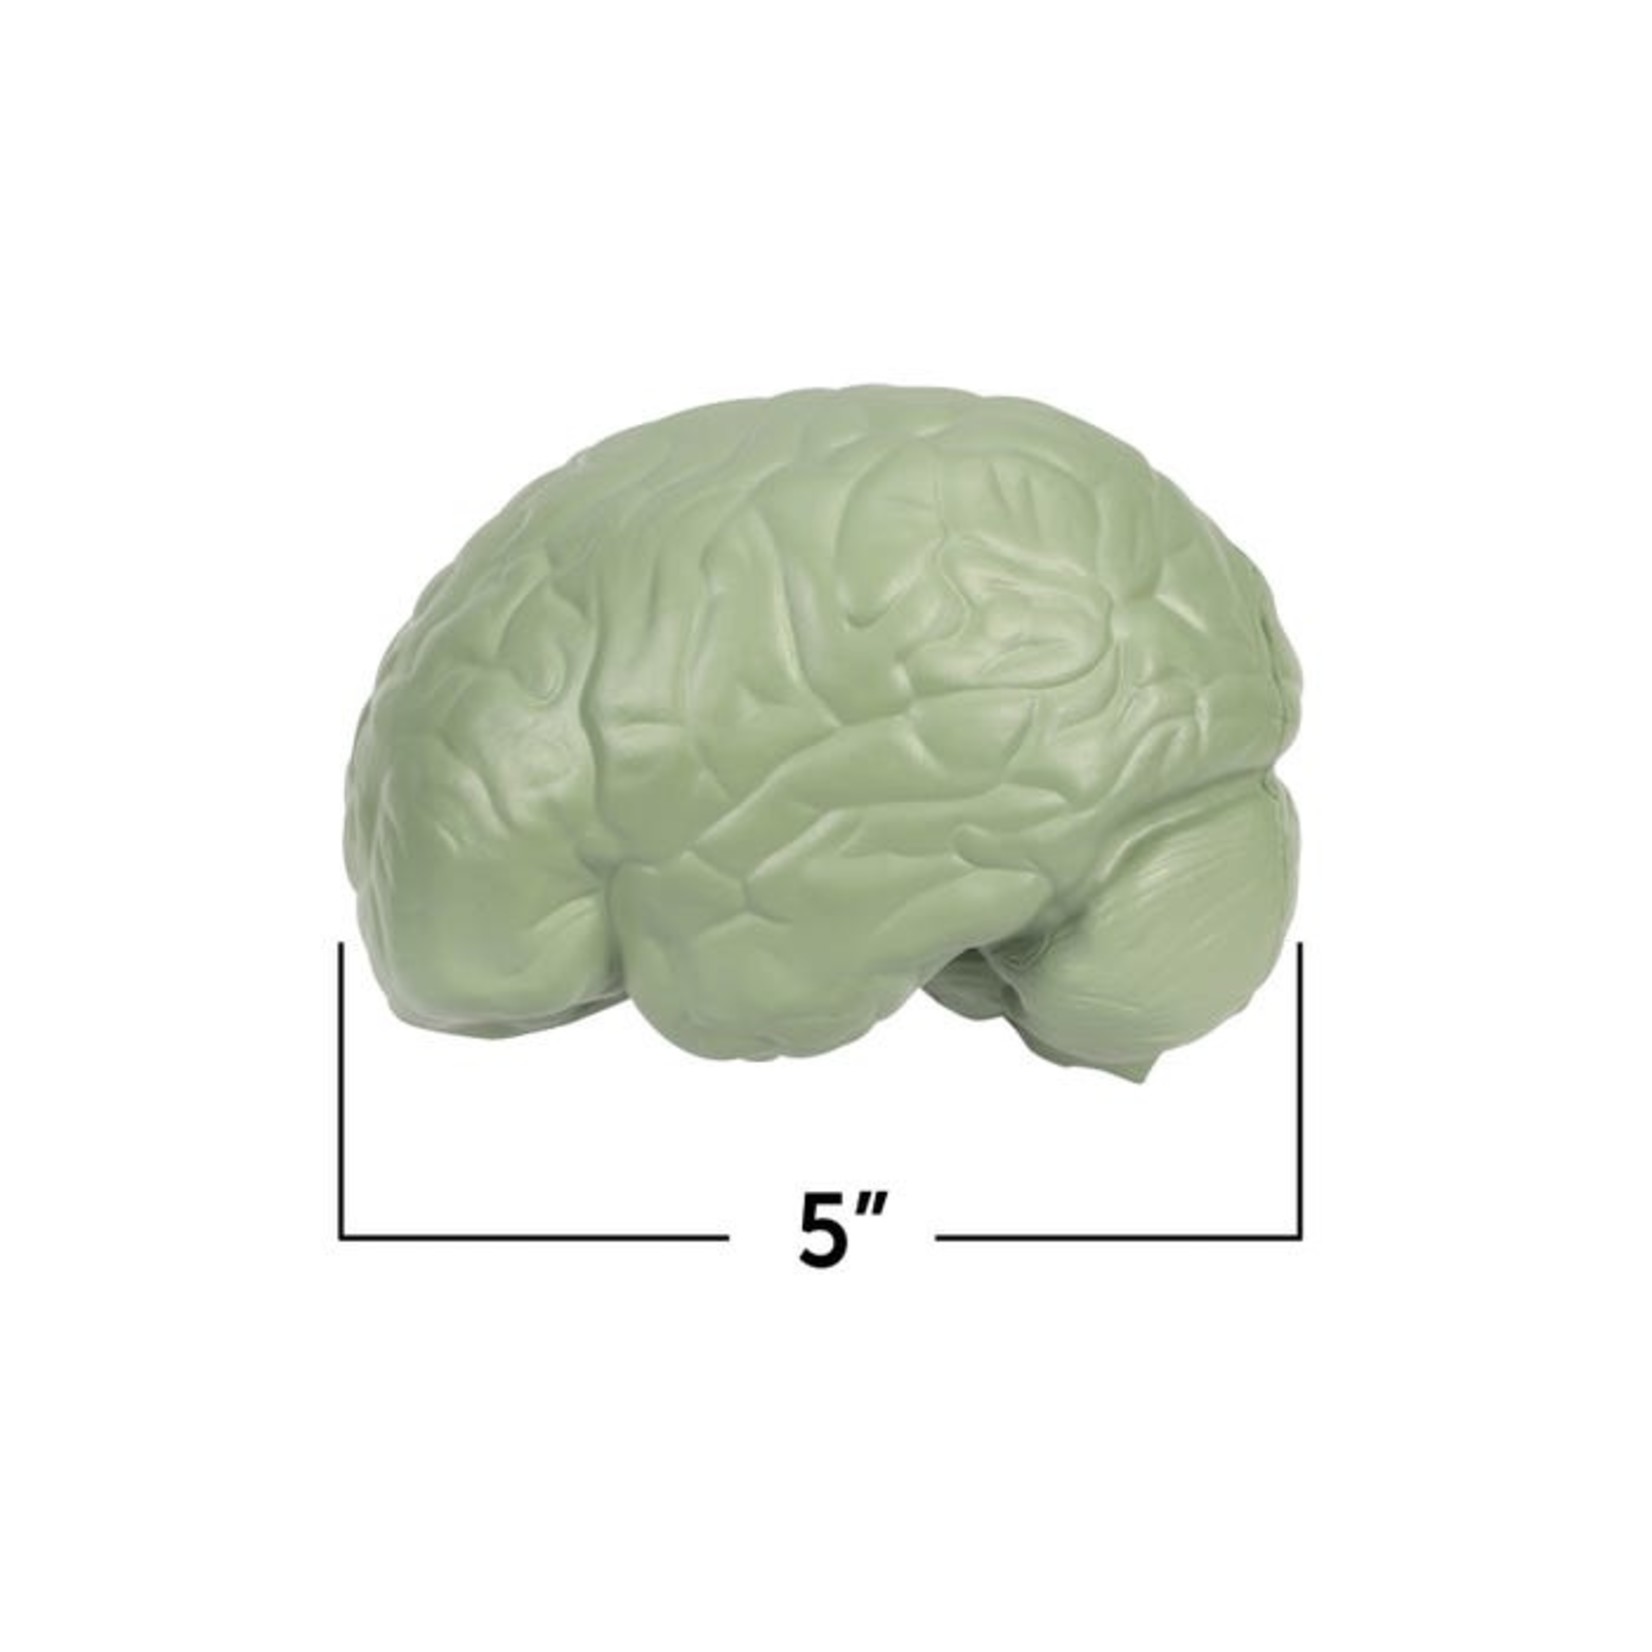 LEARNING RESOURCES INC Cross-Section Human Brain Model